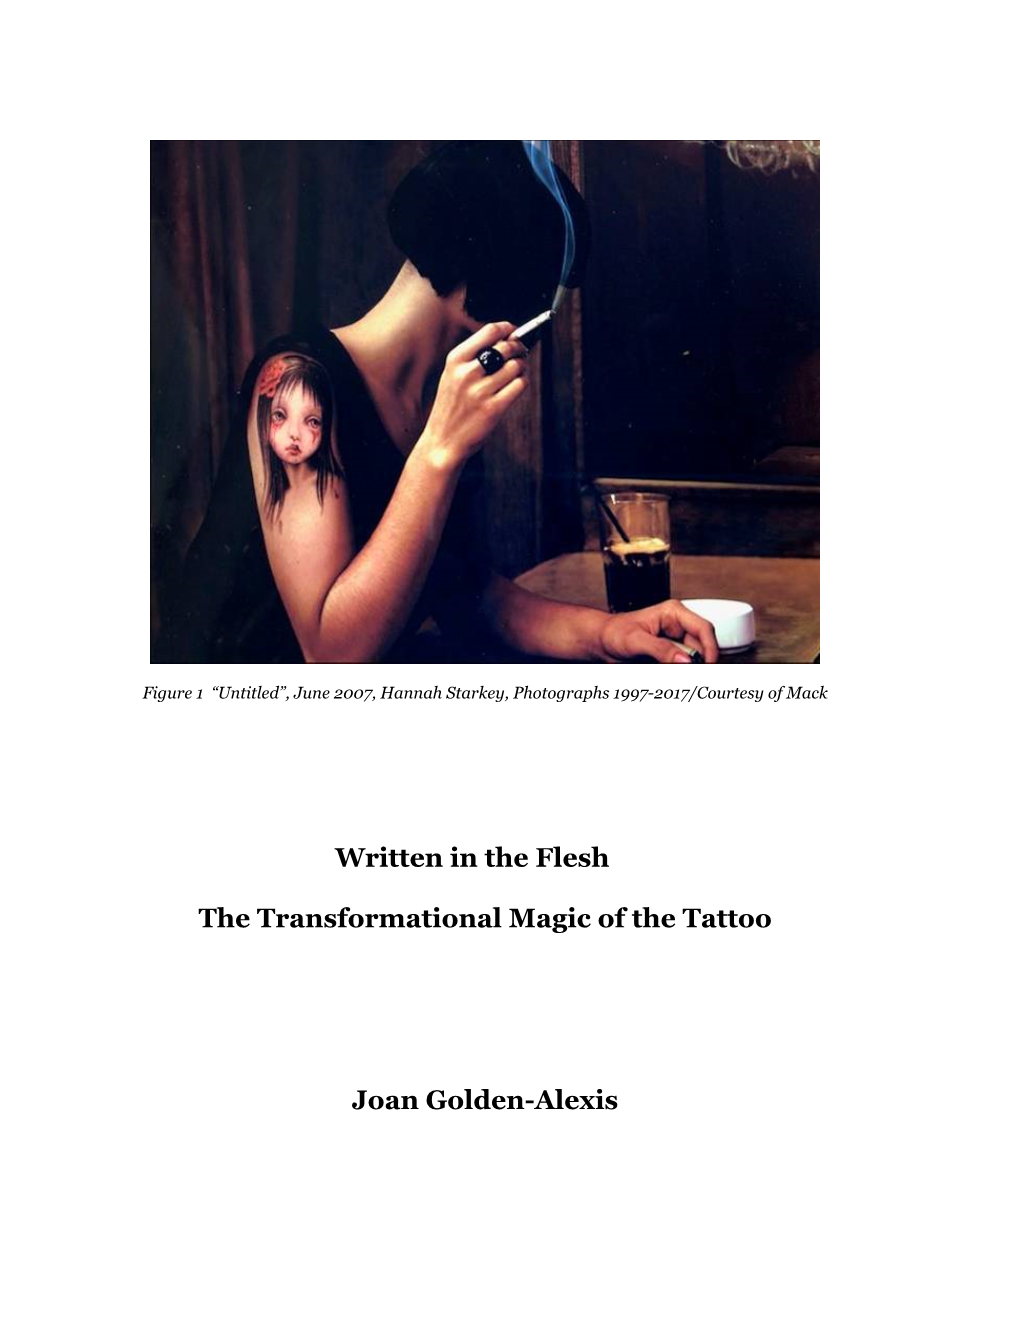 Written in the Flesh: the Transformational Magic of the Tattoo